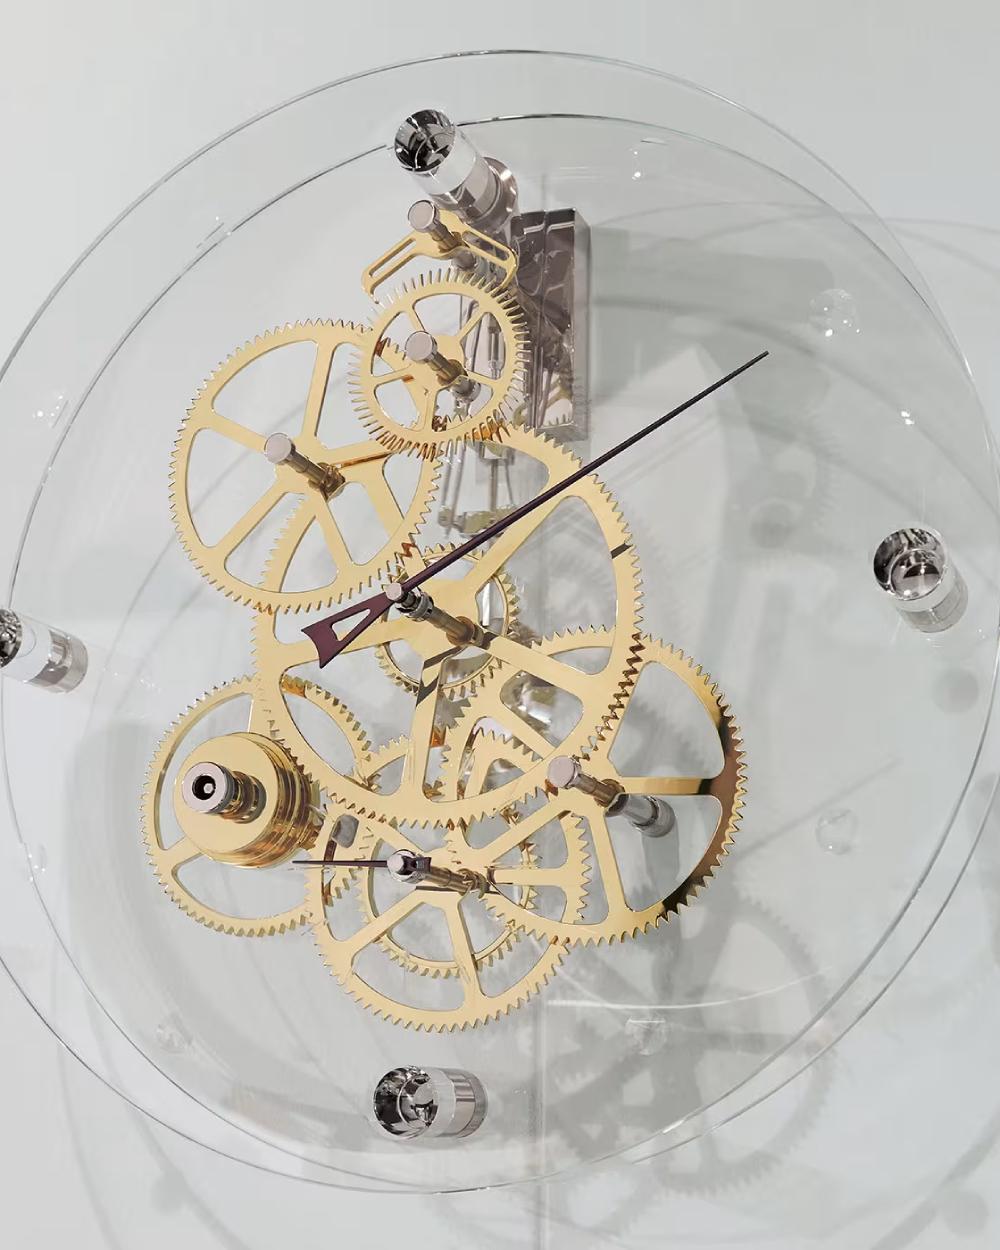 Presto wall pendulum clock designed by Gianfranco Barban for Teckell is a part of Takto timepieces collection. This gorgeous timepiece is the modern definition of time. The Graham escapement is visible within the two crystal disks that make up the